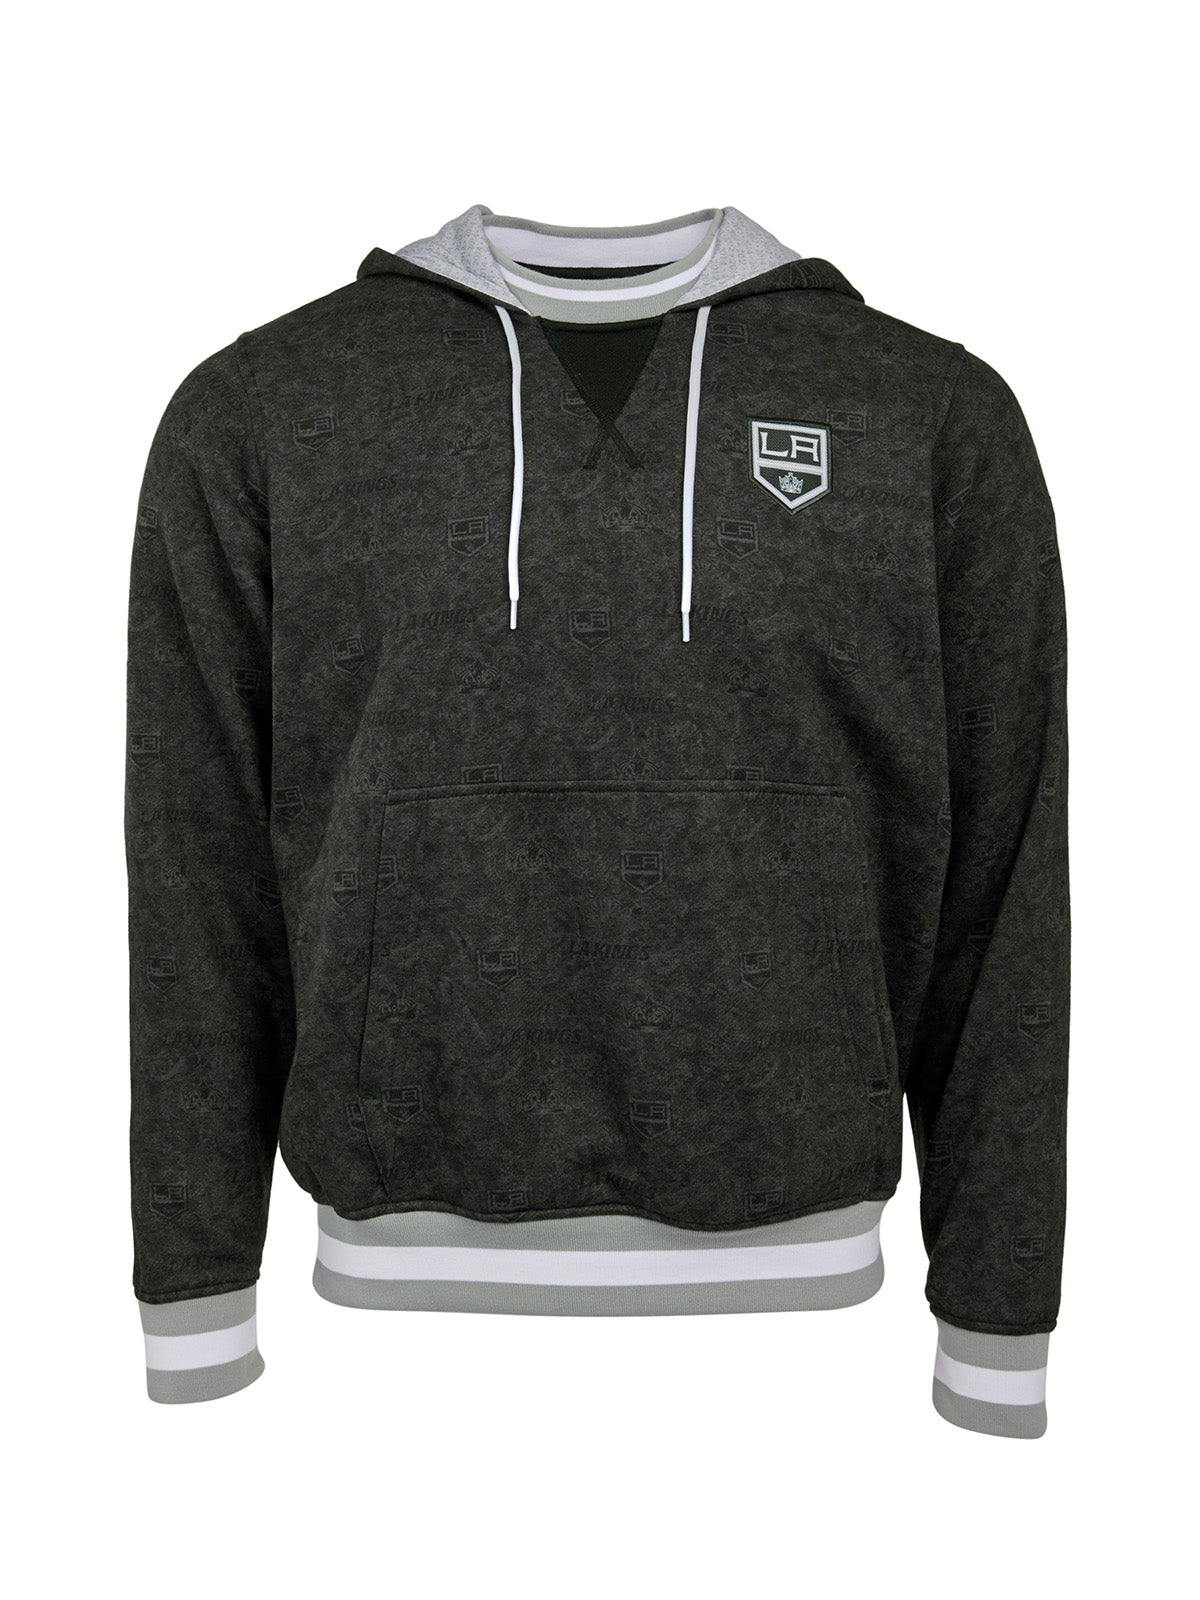 Los Angeles Kings Hoodie - Show your team spirit, with the iconic team logo patch on the front left chest, and proudly display your LA Kings support in their team colors with this NHL hockey hoodie.